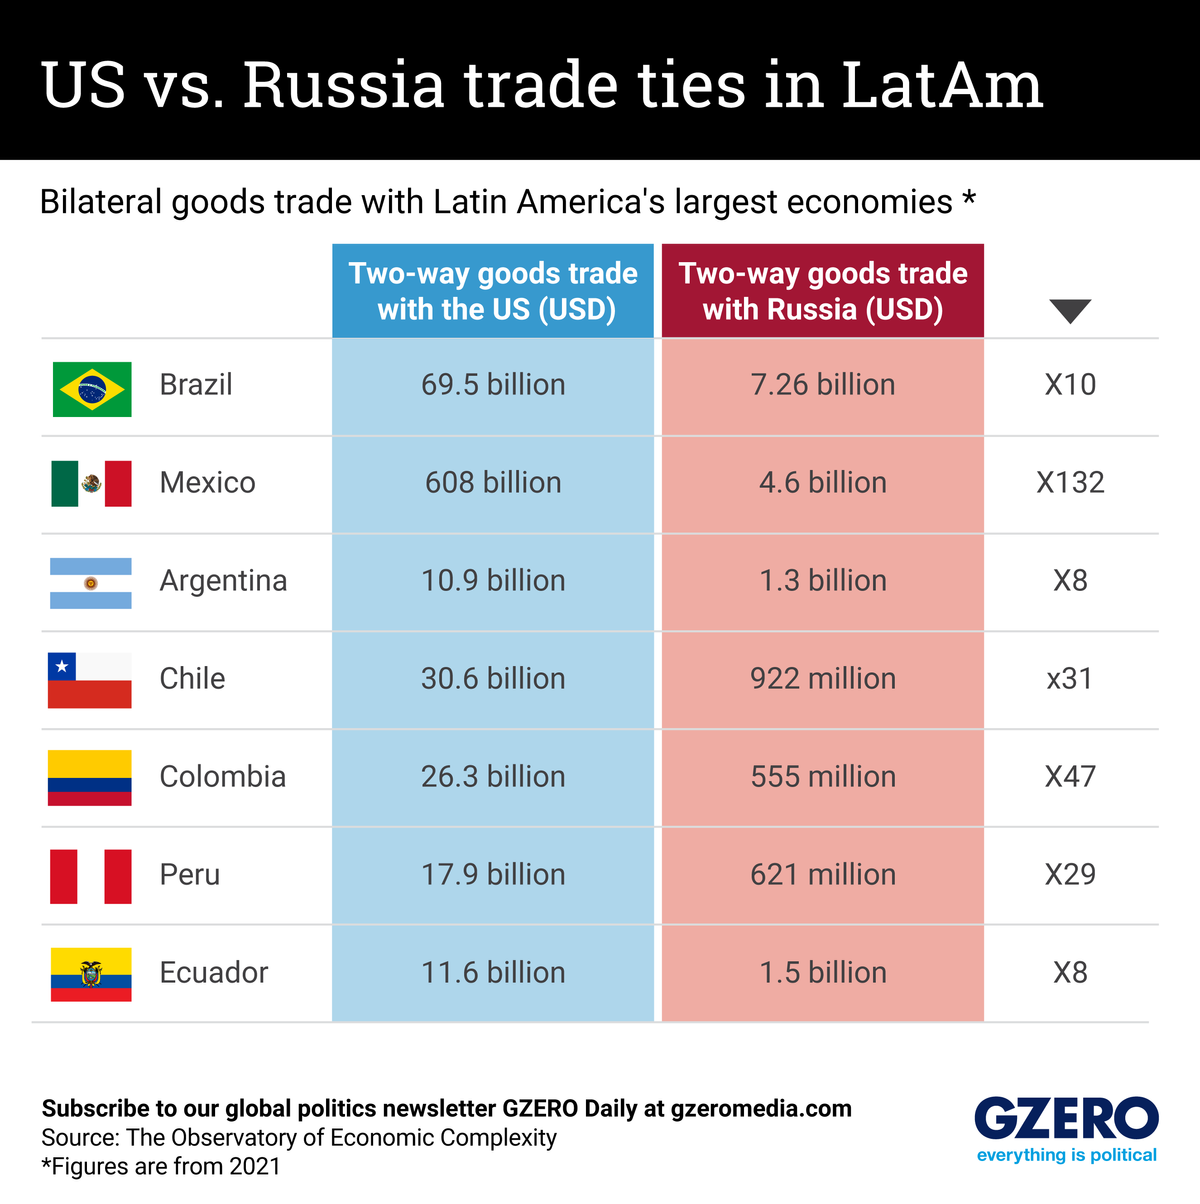 The Graphic Truth: US vs. Russia trade ties in LatAm